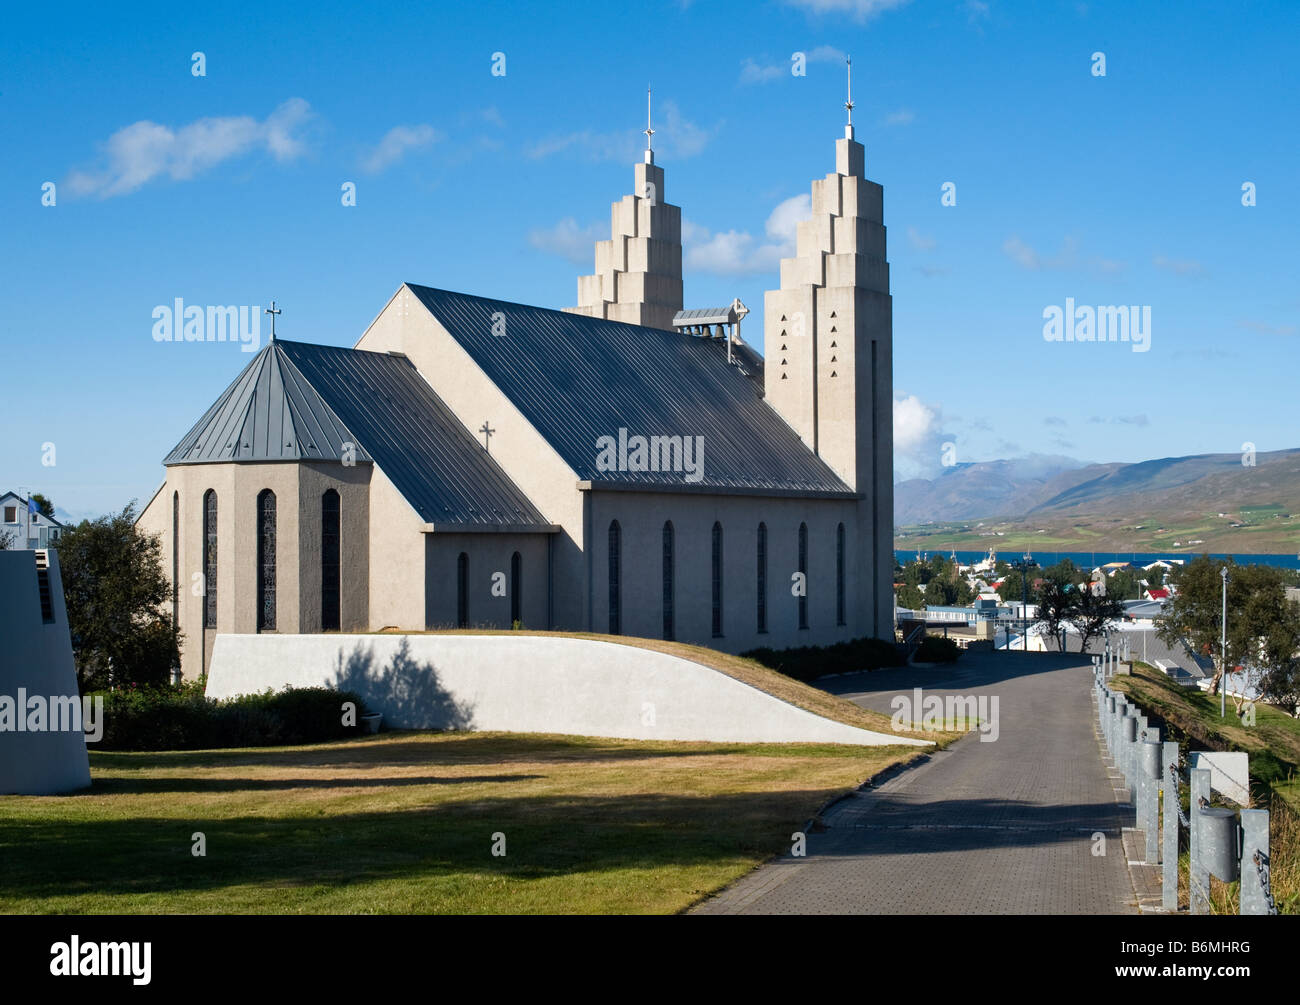 Akureyri Cathedral, looking out over the city of Akureyri on Eyjafjordur in northern Iceland Stock Photo